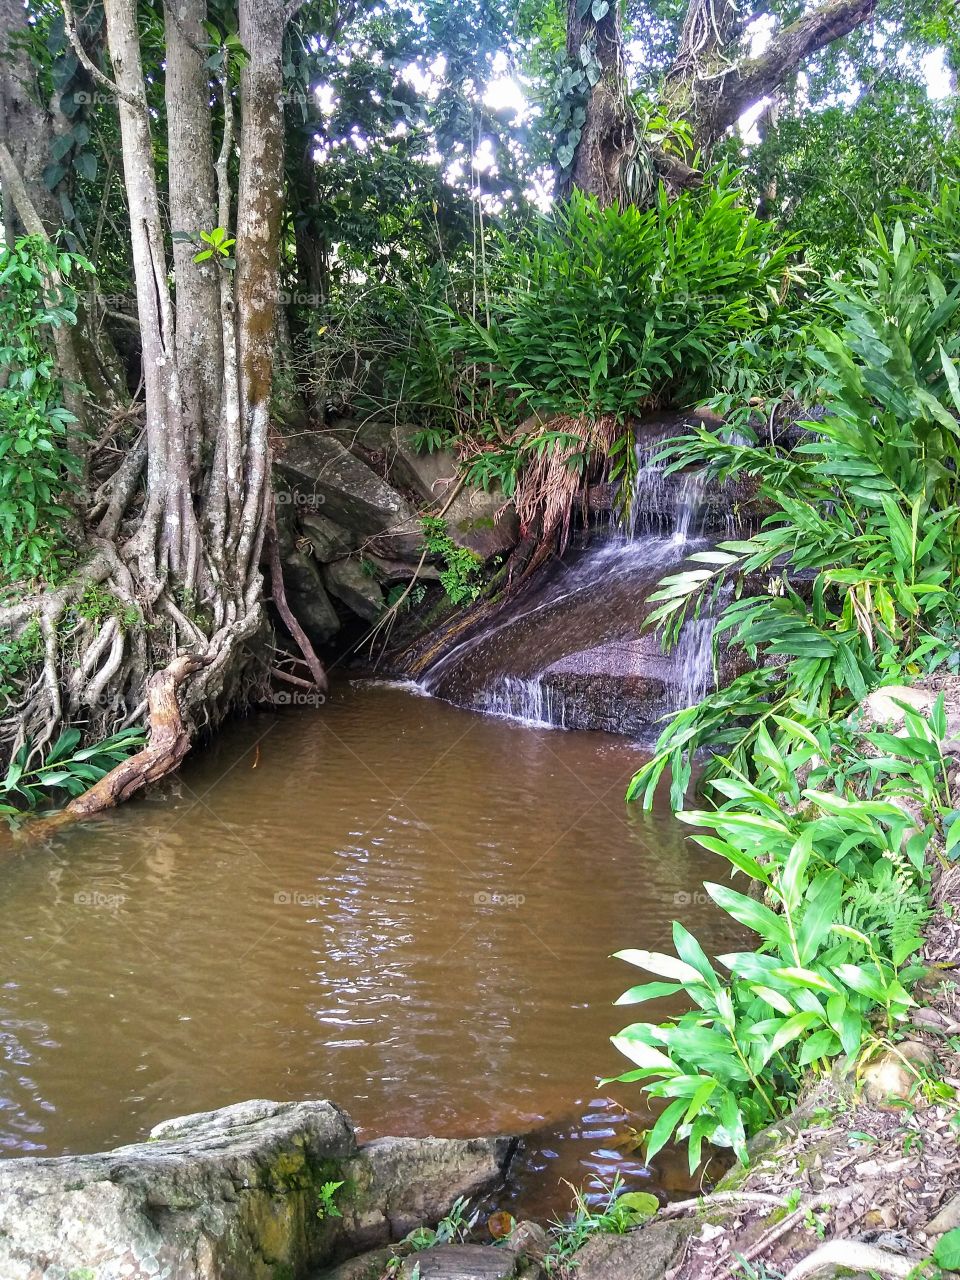 Small Waterfall forming a natural pool with plants and trees around it.